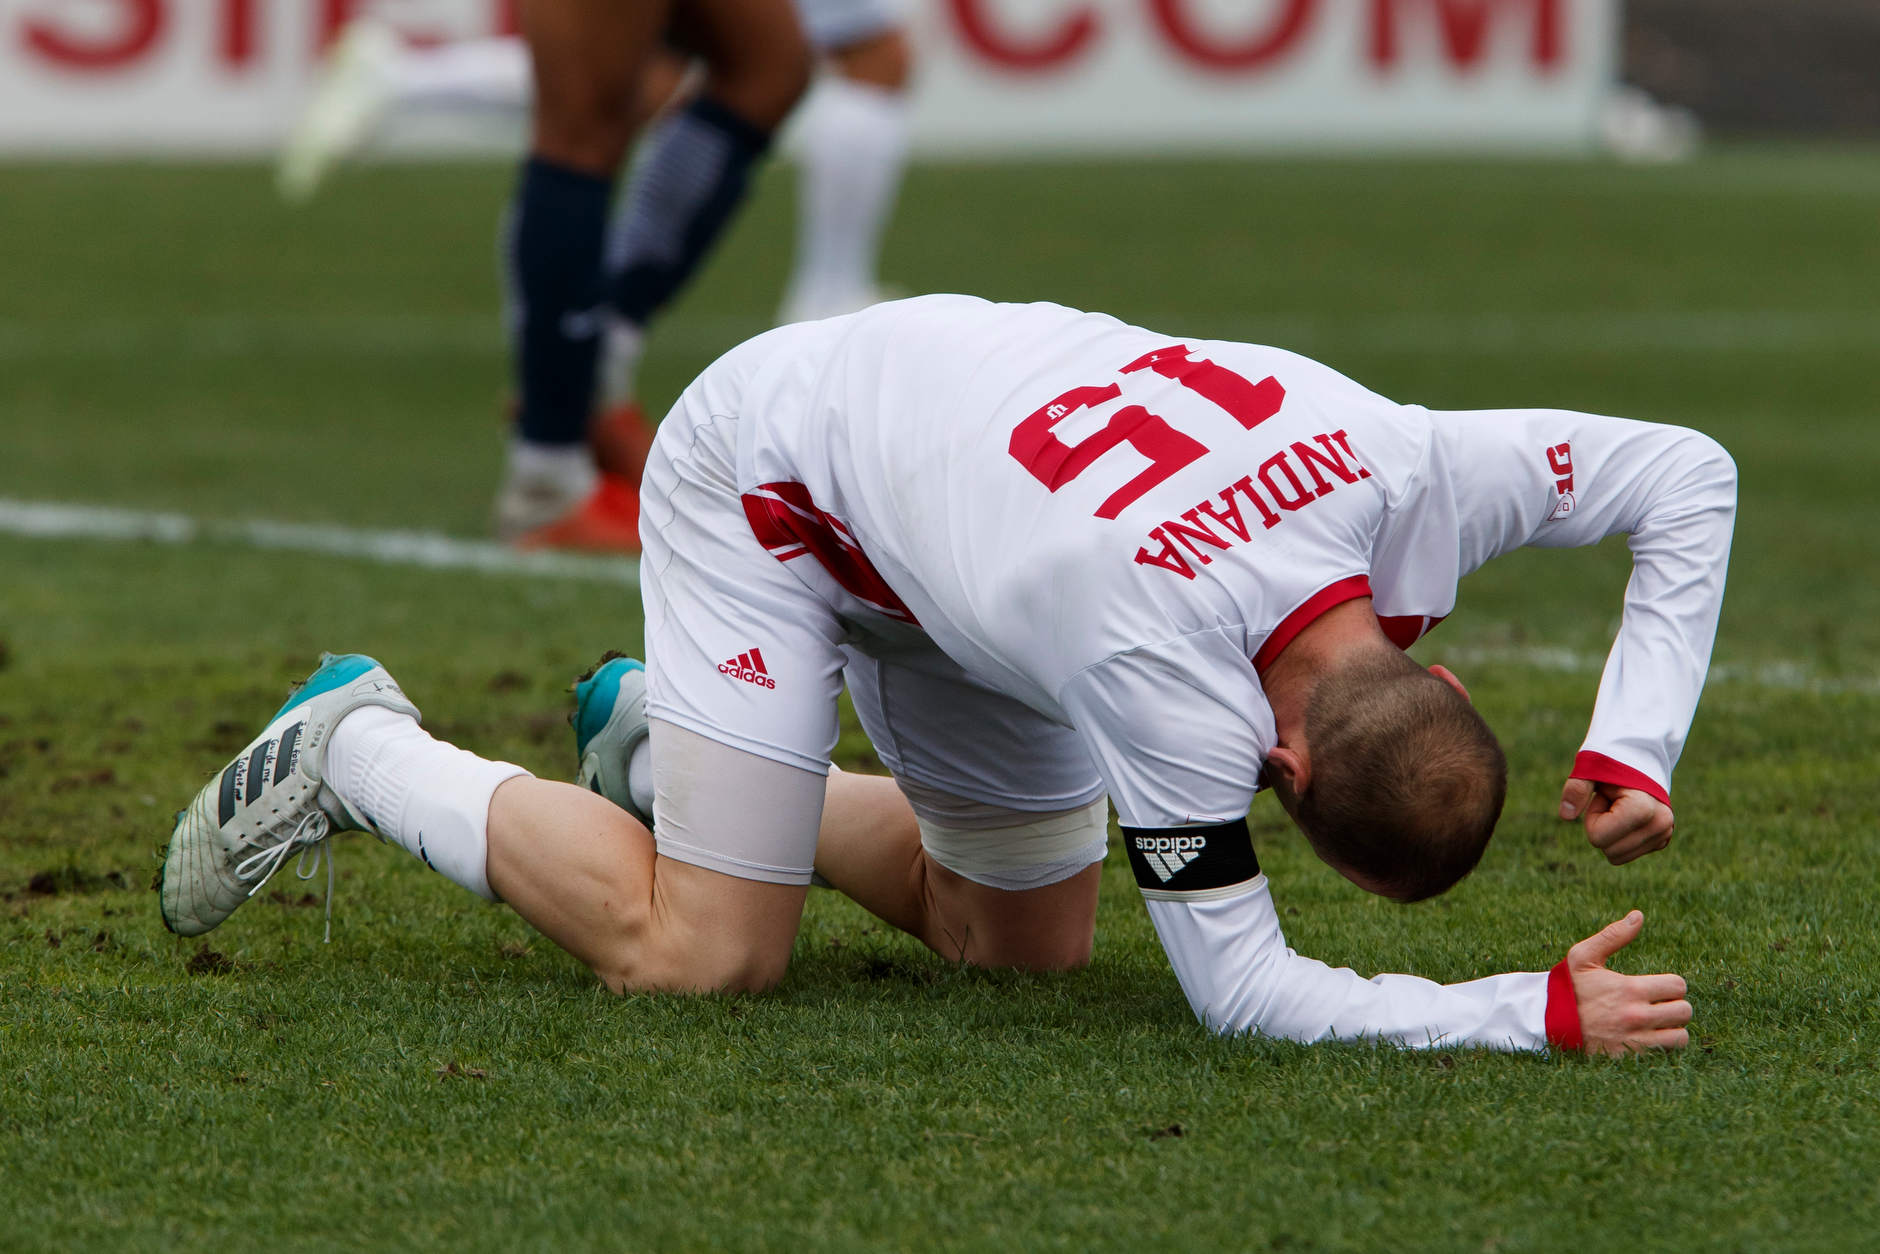 Indiana's Andrew Gutman (15) pounds the ground after missing on a cross into the box during the first half of an NCAA men's soccer tournament match at Bill Armstrong Stadium in Bloomington, Ind. on Sunday, Nov. 18, 2018. (James Brosher for The Herald-Times)